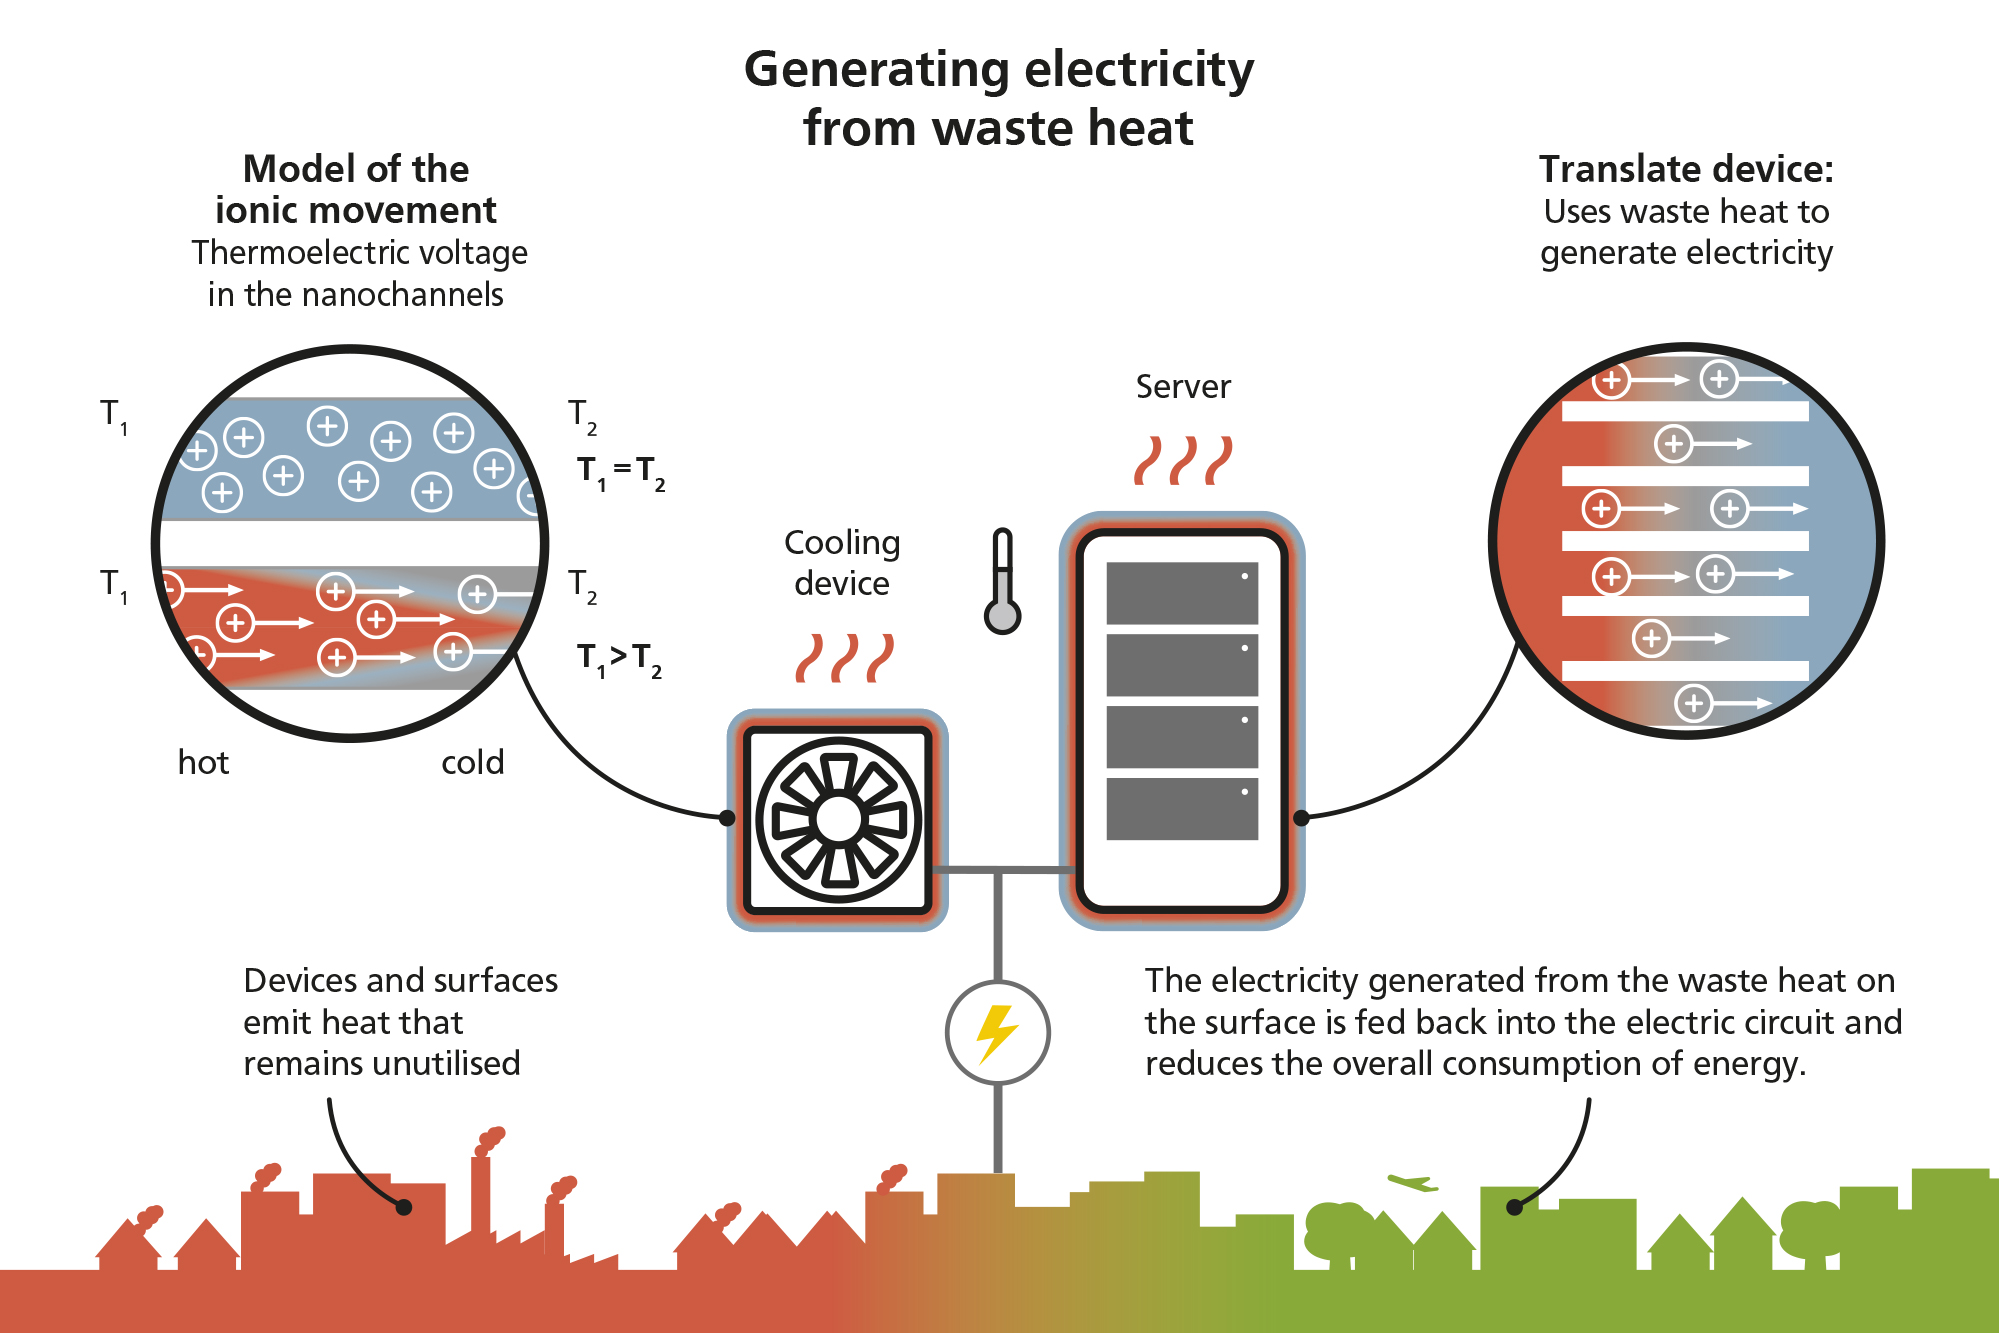 waste heat released by people and machines to be converted into electricity in the future